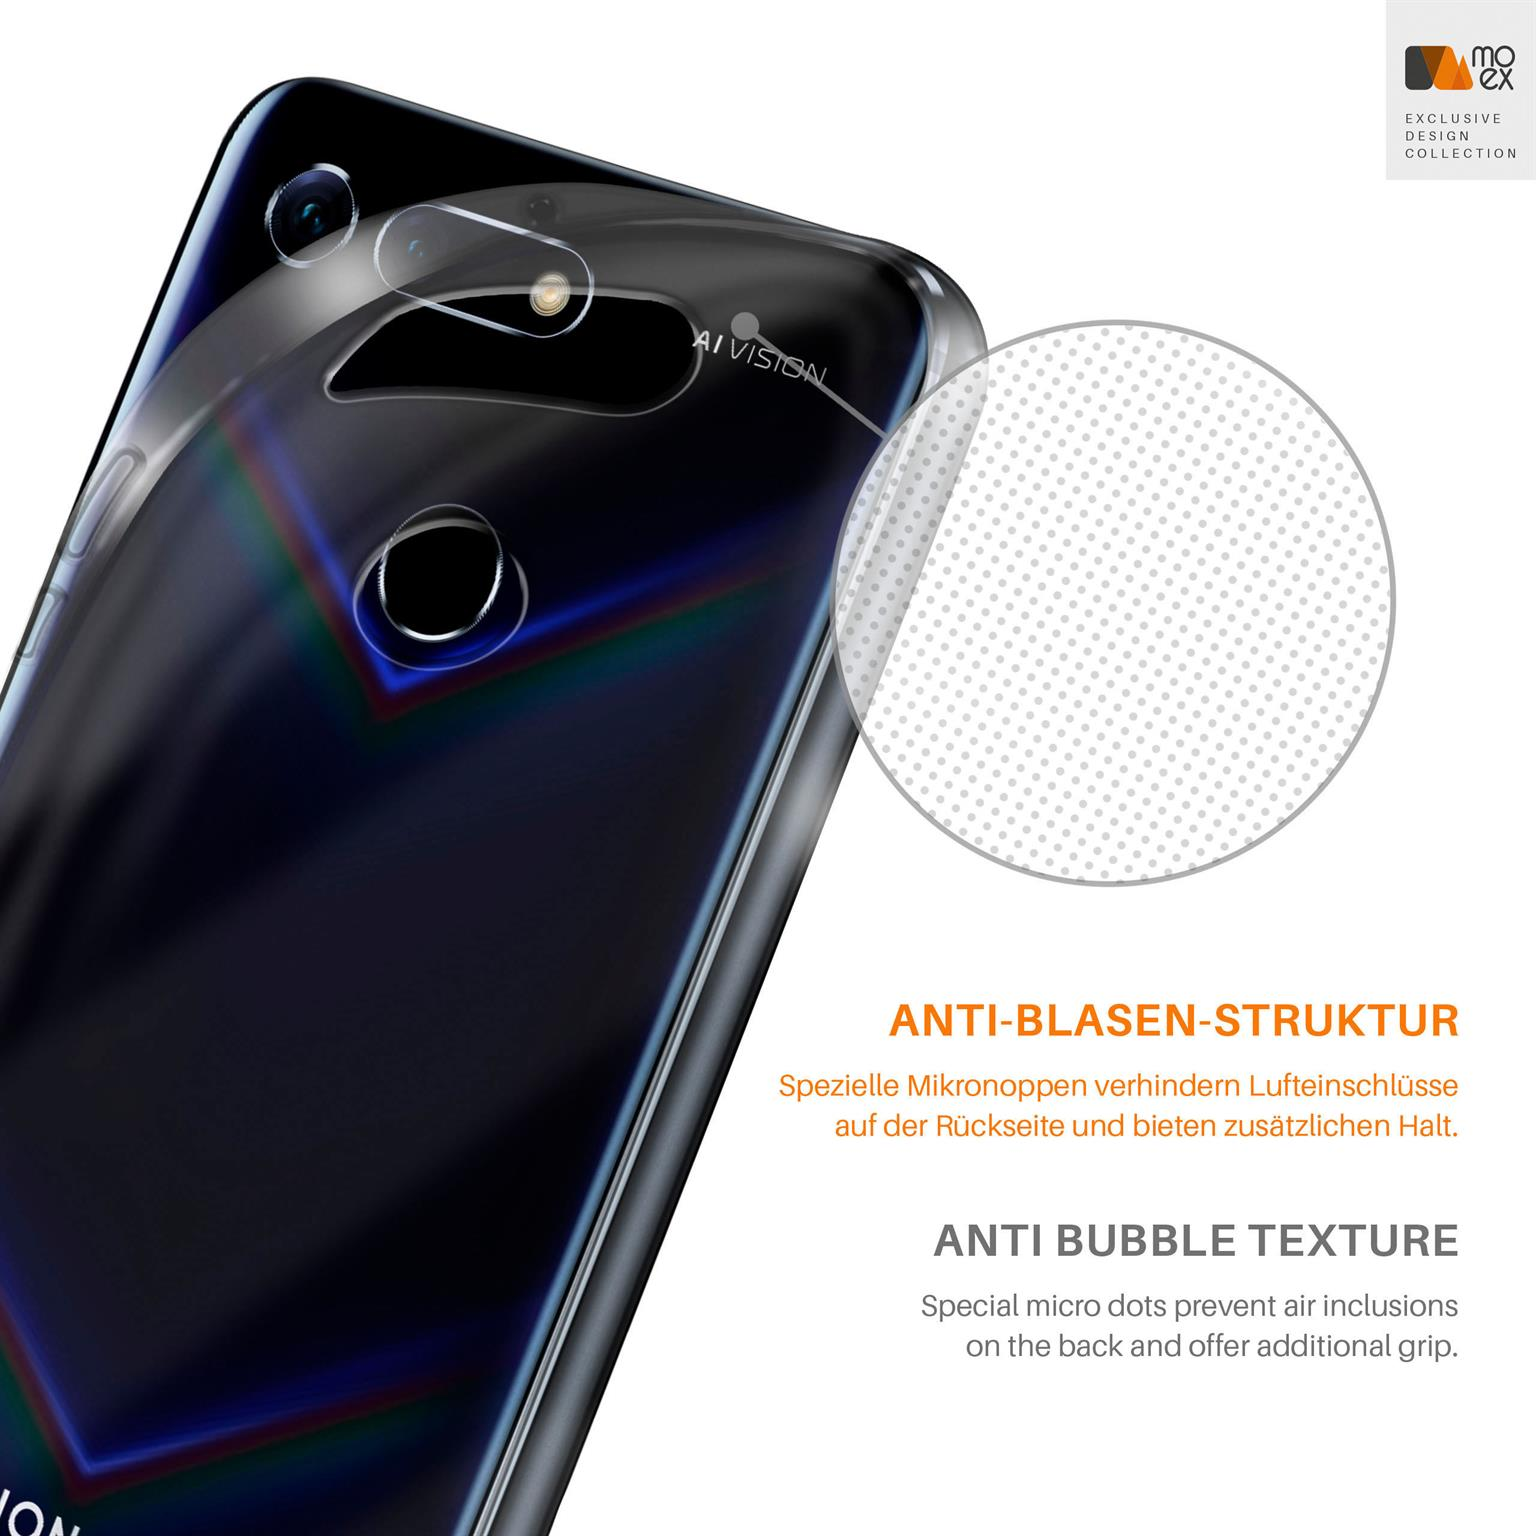 Backcover, Aero Crystal-Clear View 20, Huawei, Honor MOEX Case,